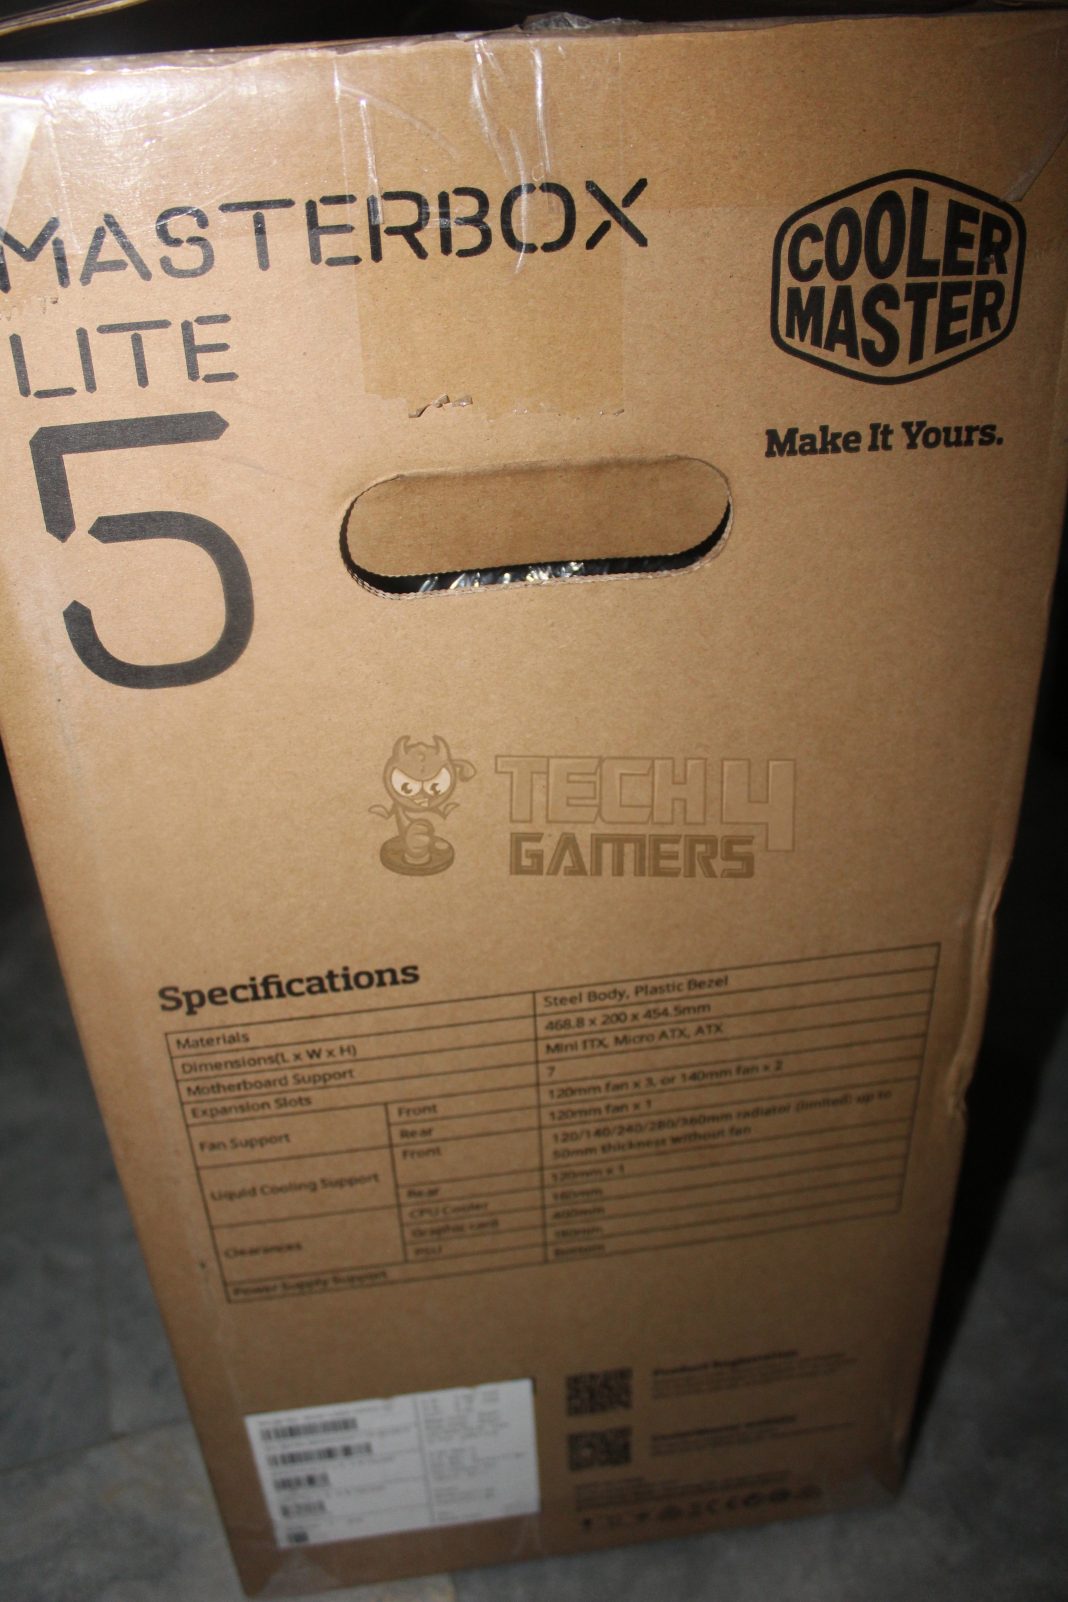 Masterbox lite 5 RGB Front Side Packaging